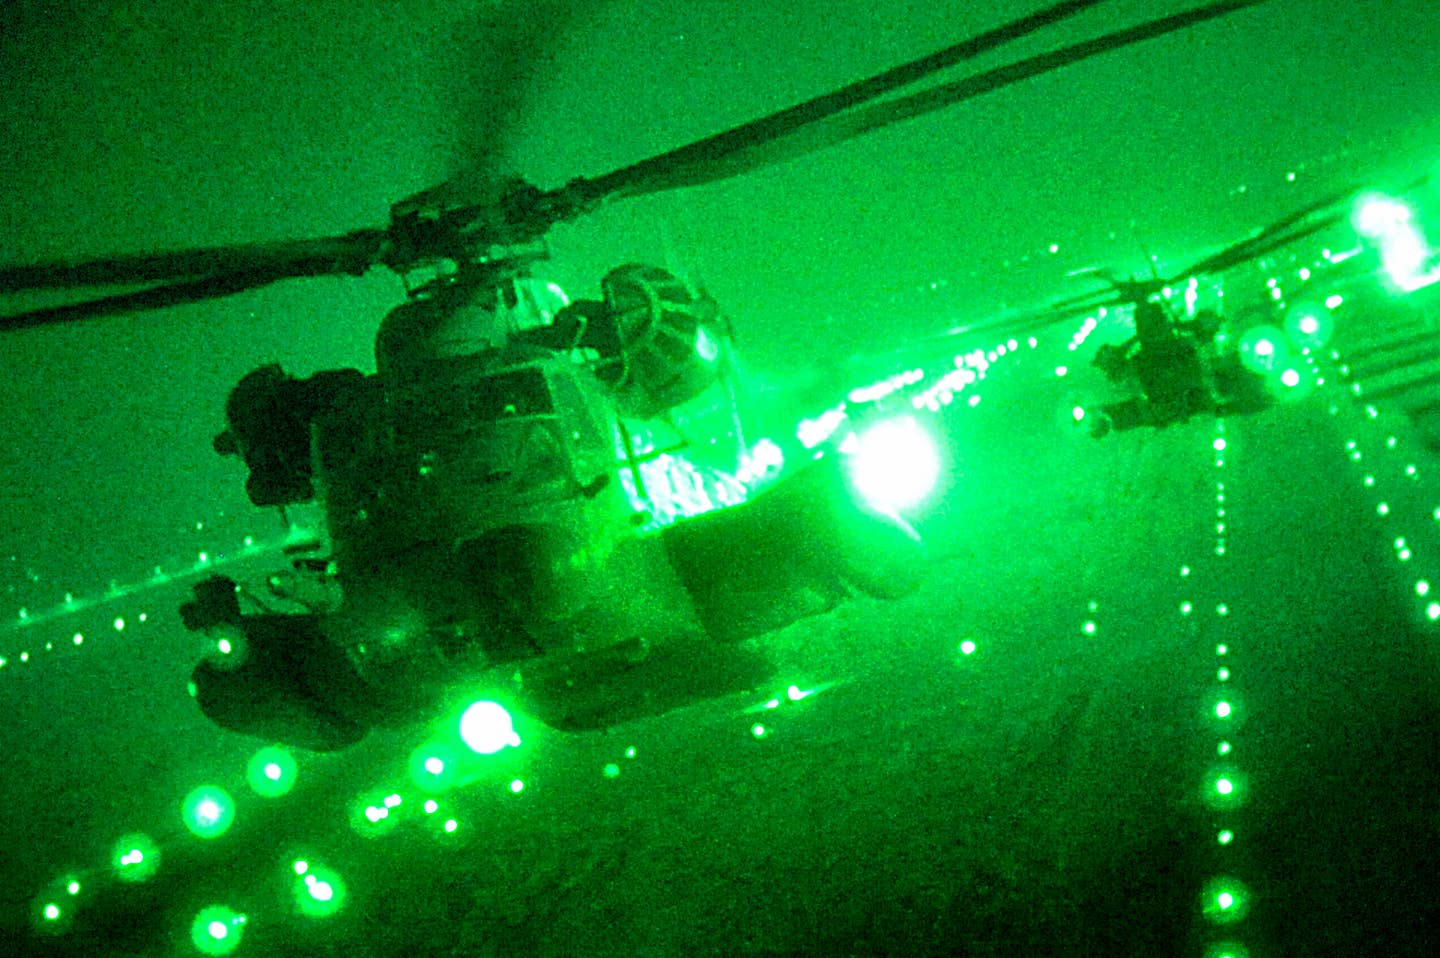 MH-53 Pave Low helicopters carry out the last mission before the type's retirement in 2008.<br>(USAF)